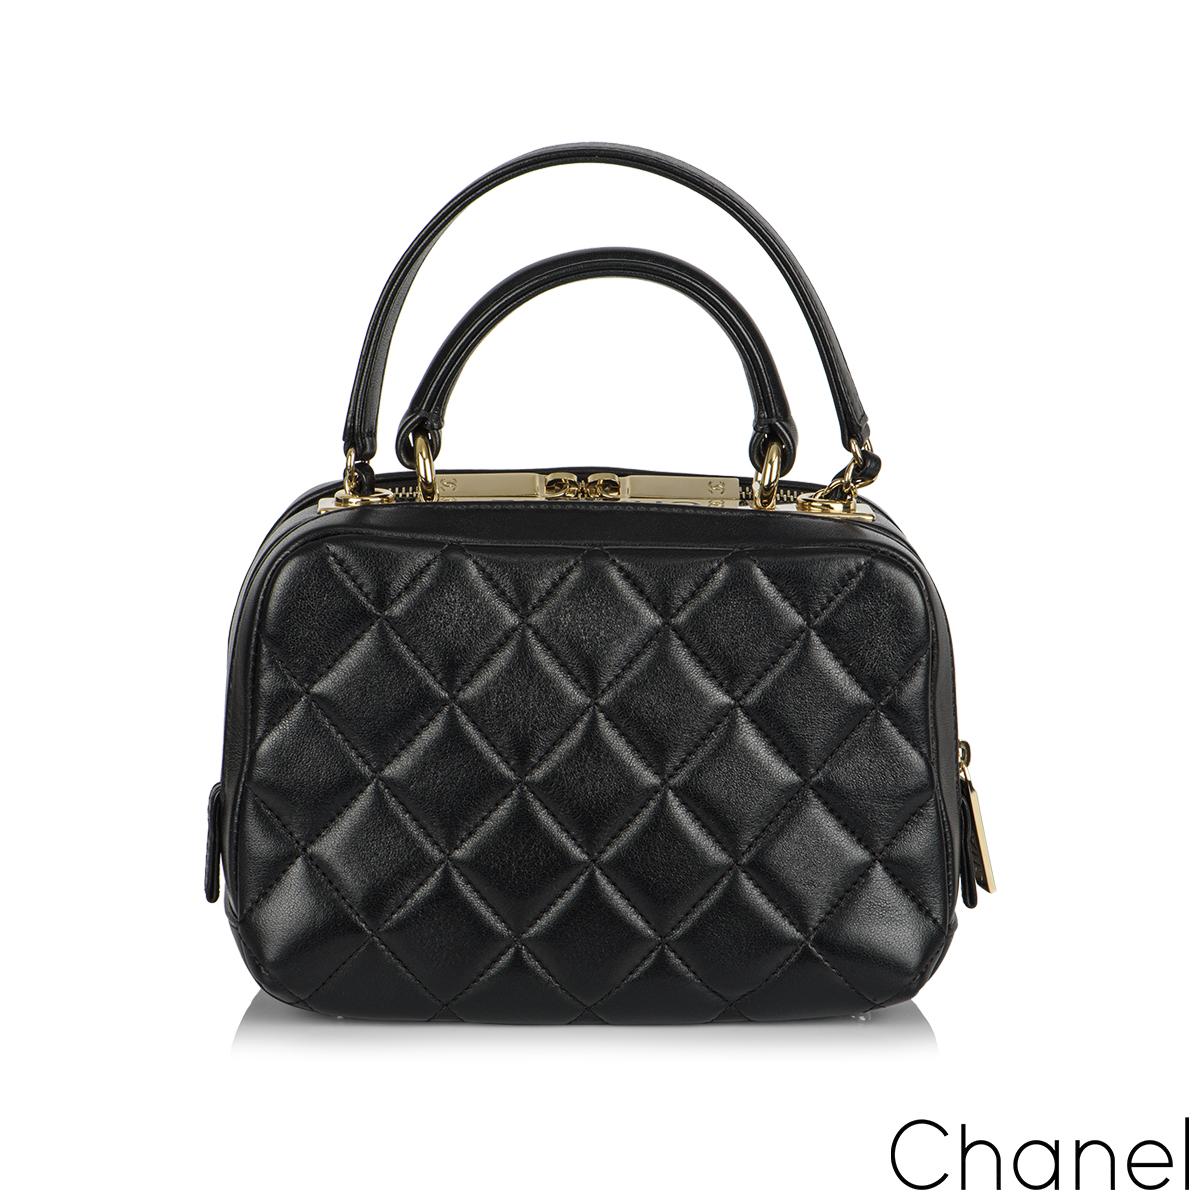 A stylish black Chanel Trendy CC Bowling Bag. The exterior of this Trendy CC Bowling bag is crafted with black lambskin leather in the signature diamond style stitching with gold-tone hardware. It features a front open pocket and two zipper